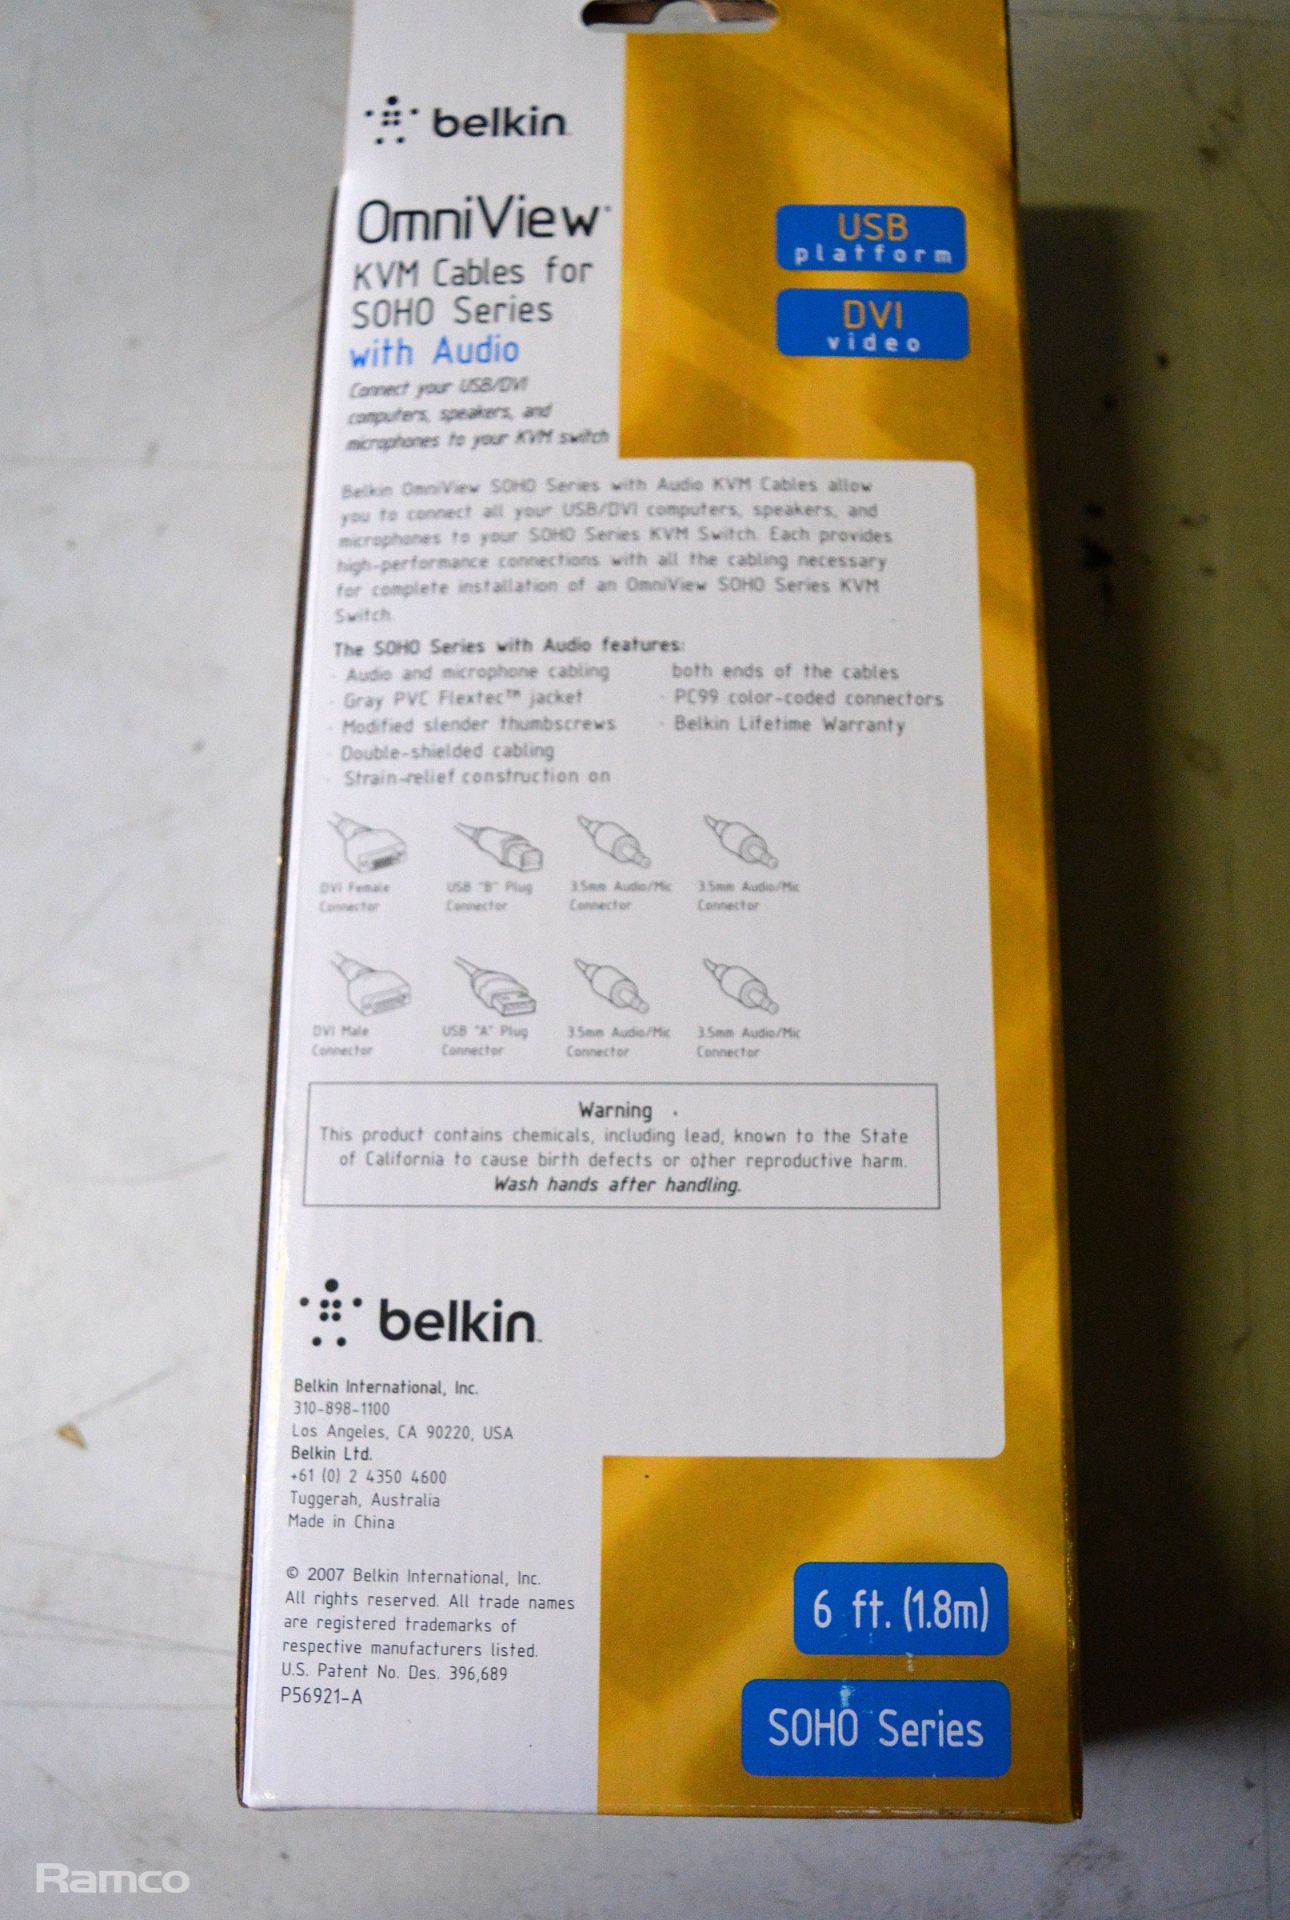 47x Belkin OmniView KVM Cables For SOHO Series With Audio - Image 5 of 6